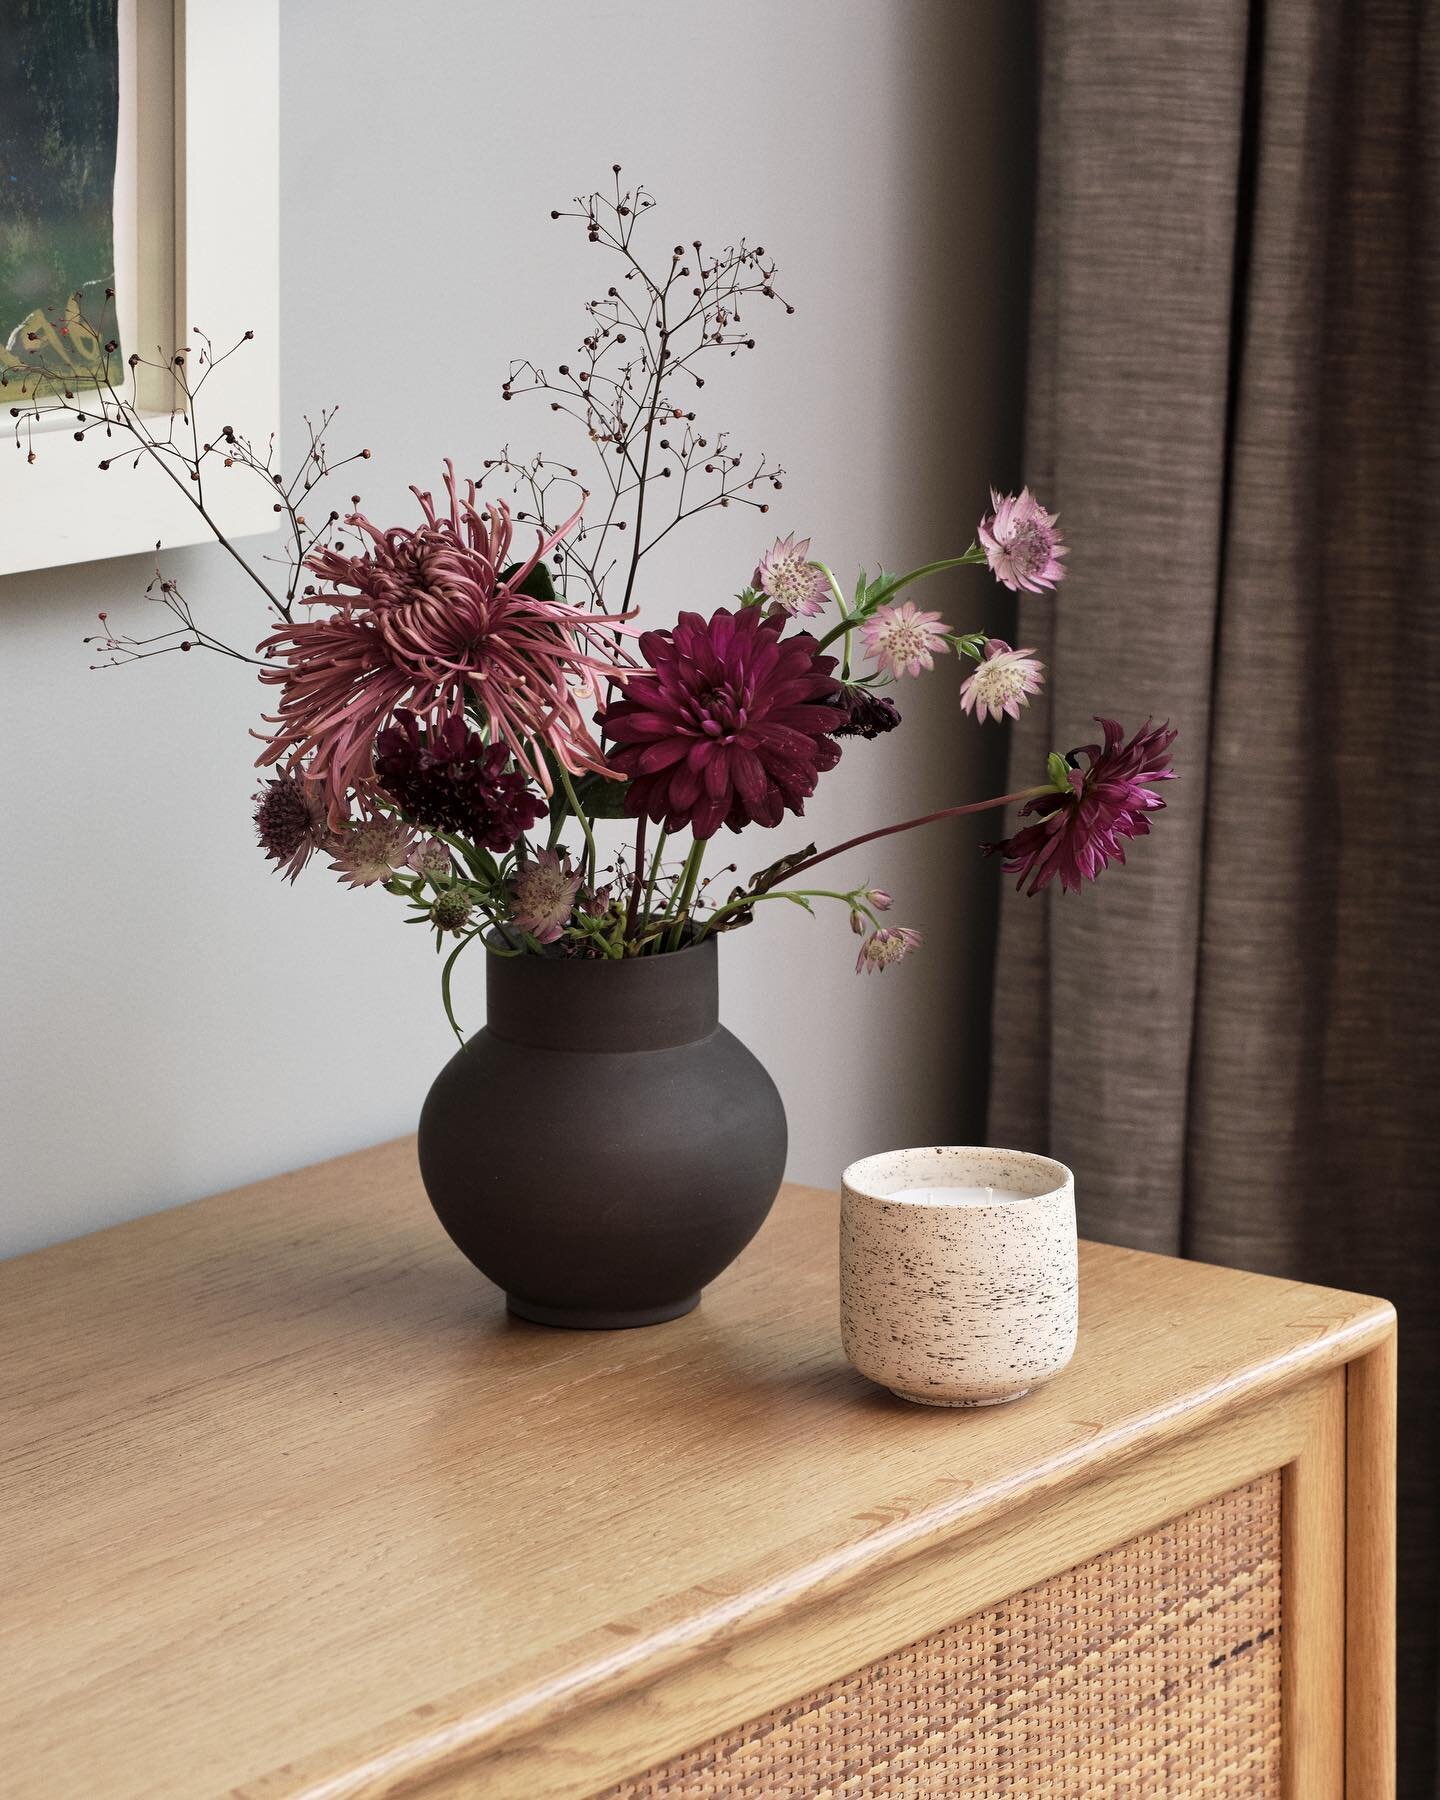 Rich and wintery colour palette in these beautiful flowers show off perfectly the Marlo black vase and it&rsquo;s little companion, the Marlo white speckled candle. Ceramics by @sammarksceramics. Candles by @rachelvosperbelgravia. Flowers from @untit